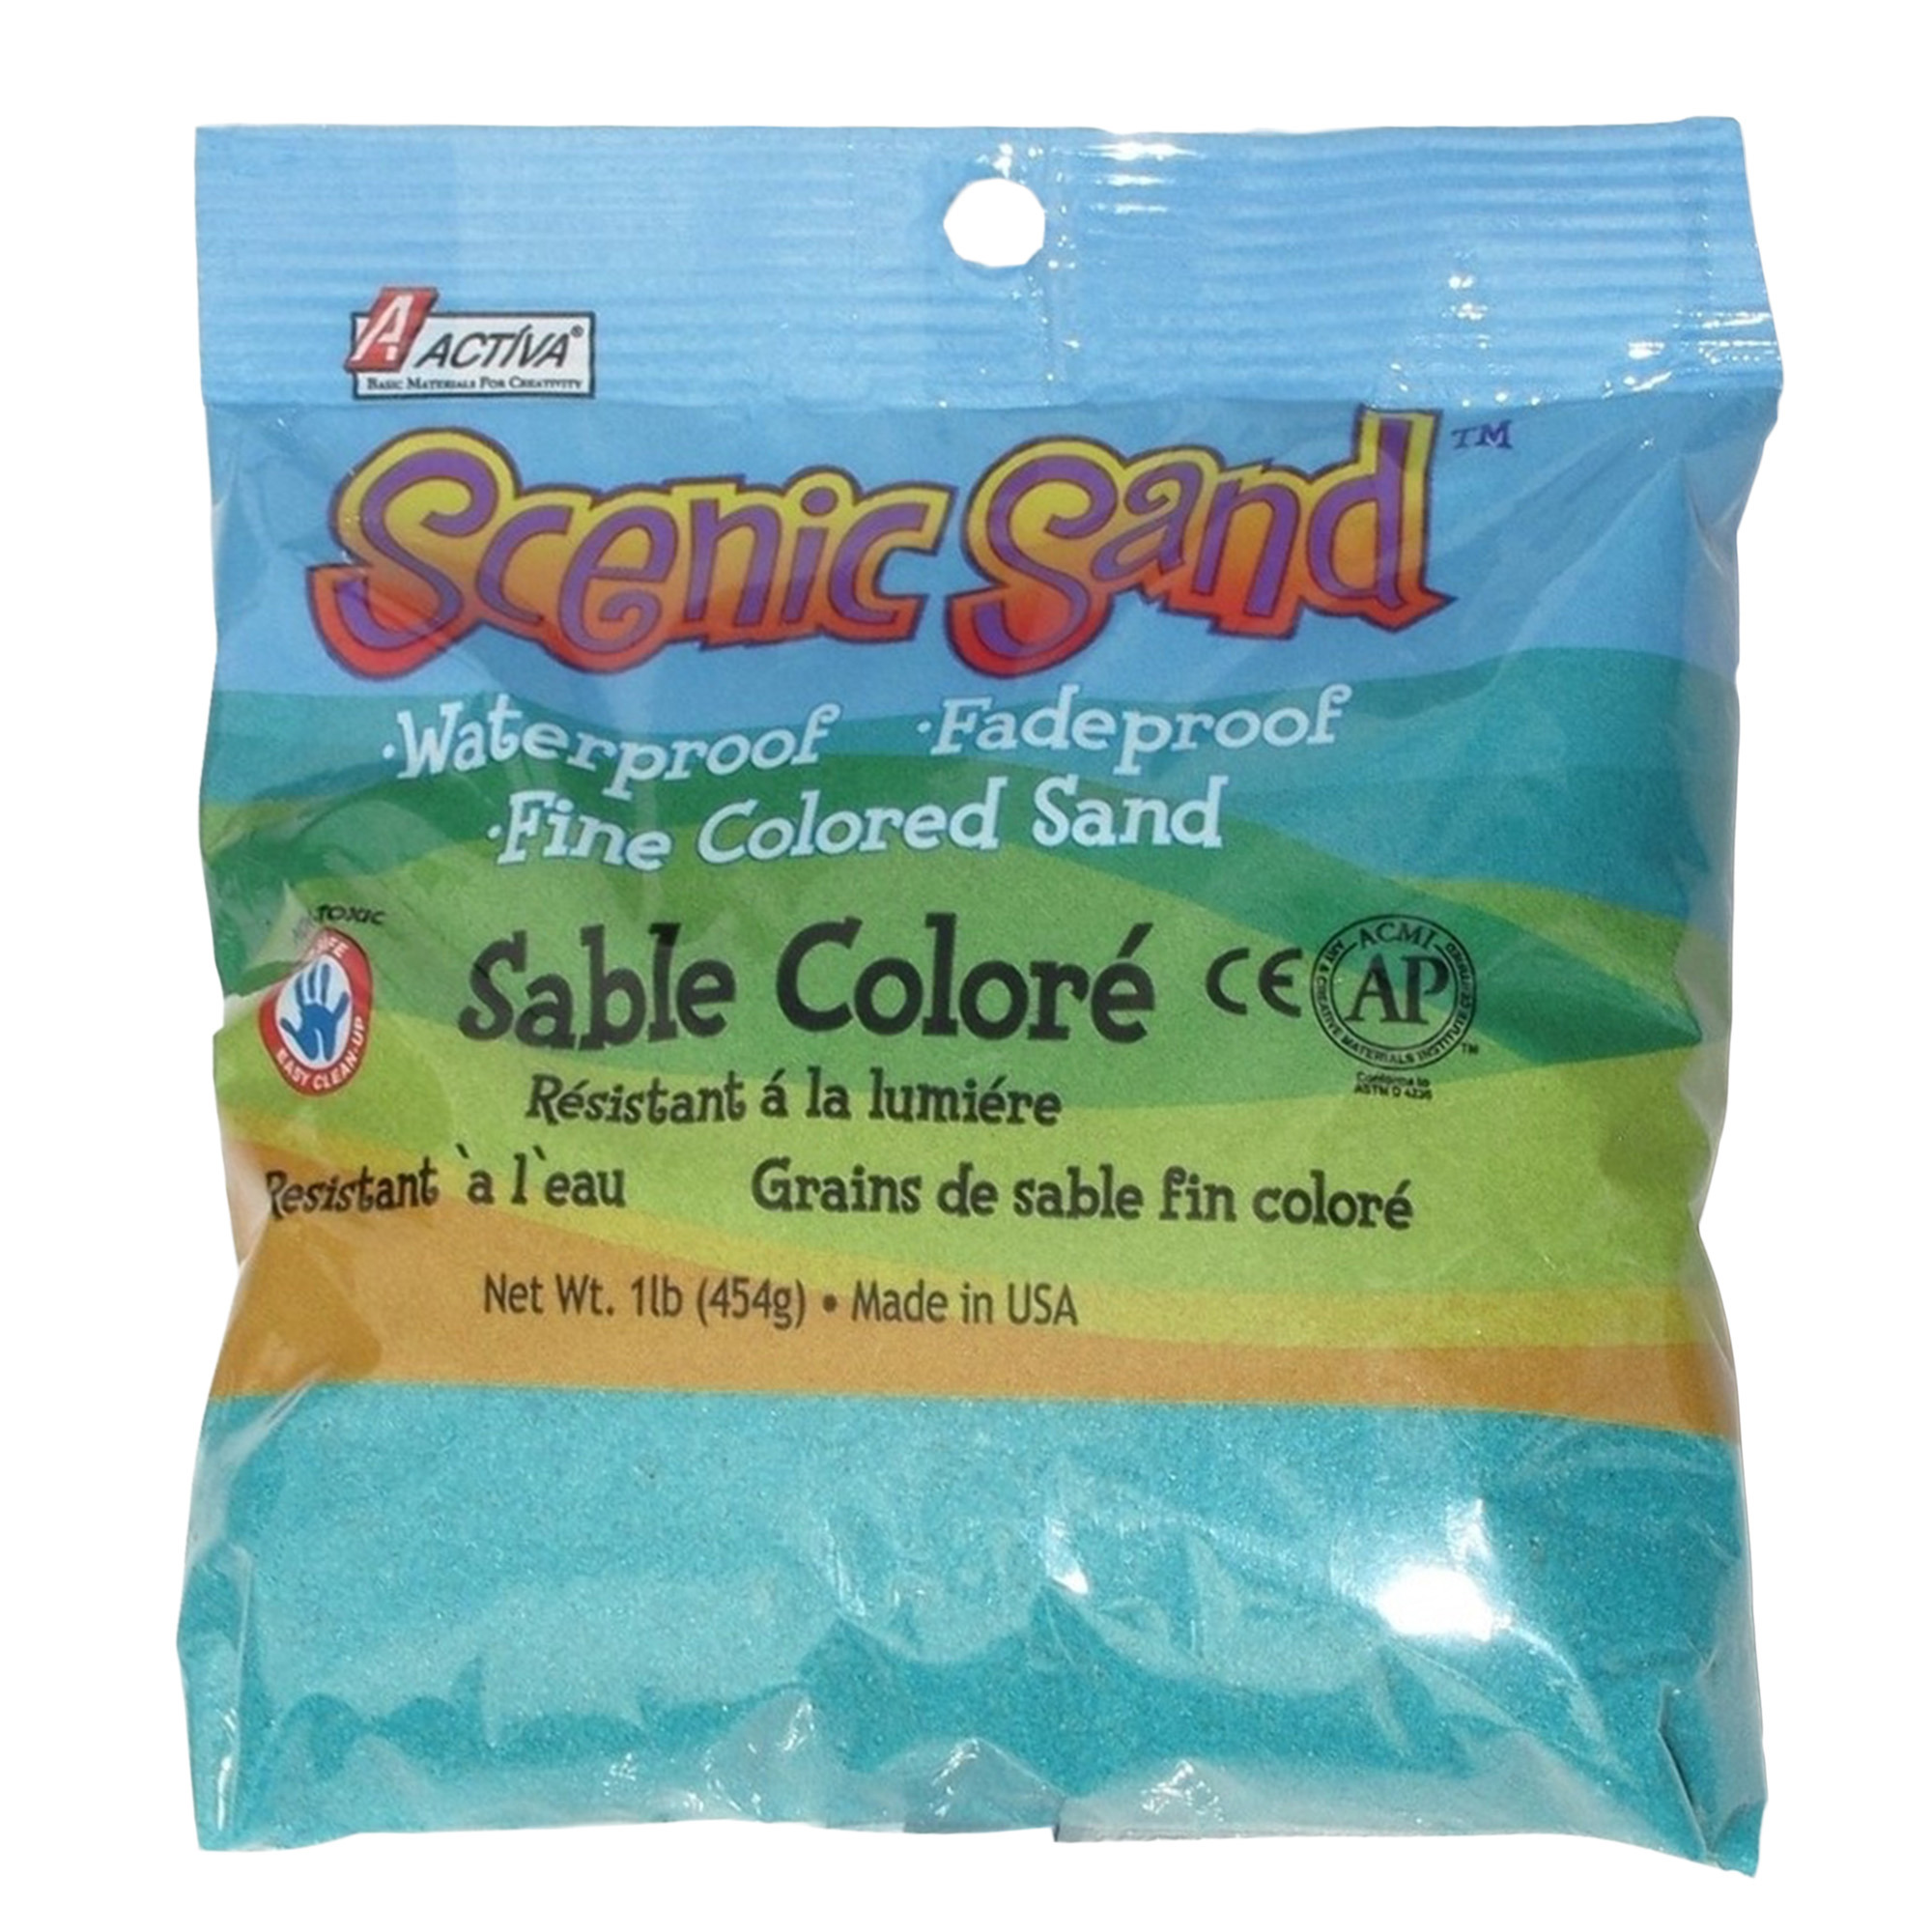 Activa Scenic Sand, 1 lb.,Turquoise - image 1 of 2